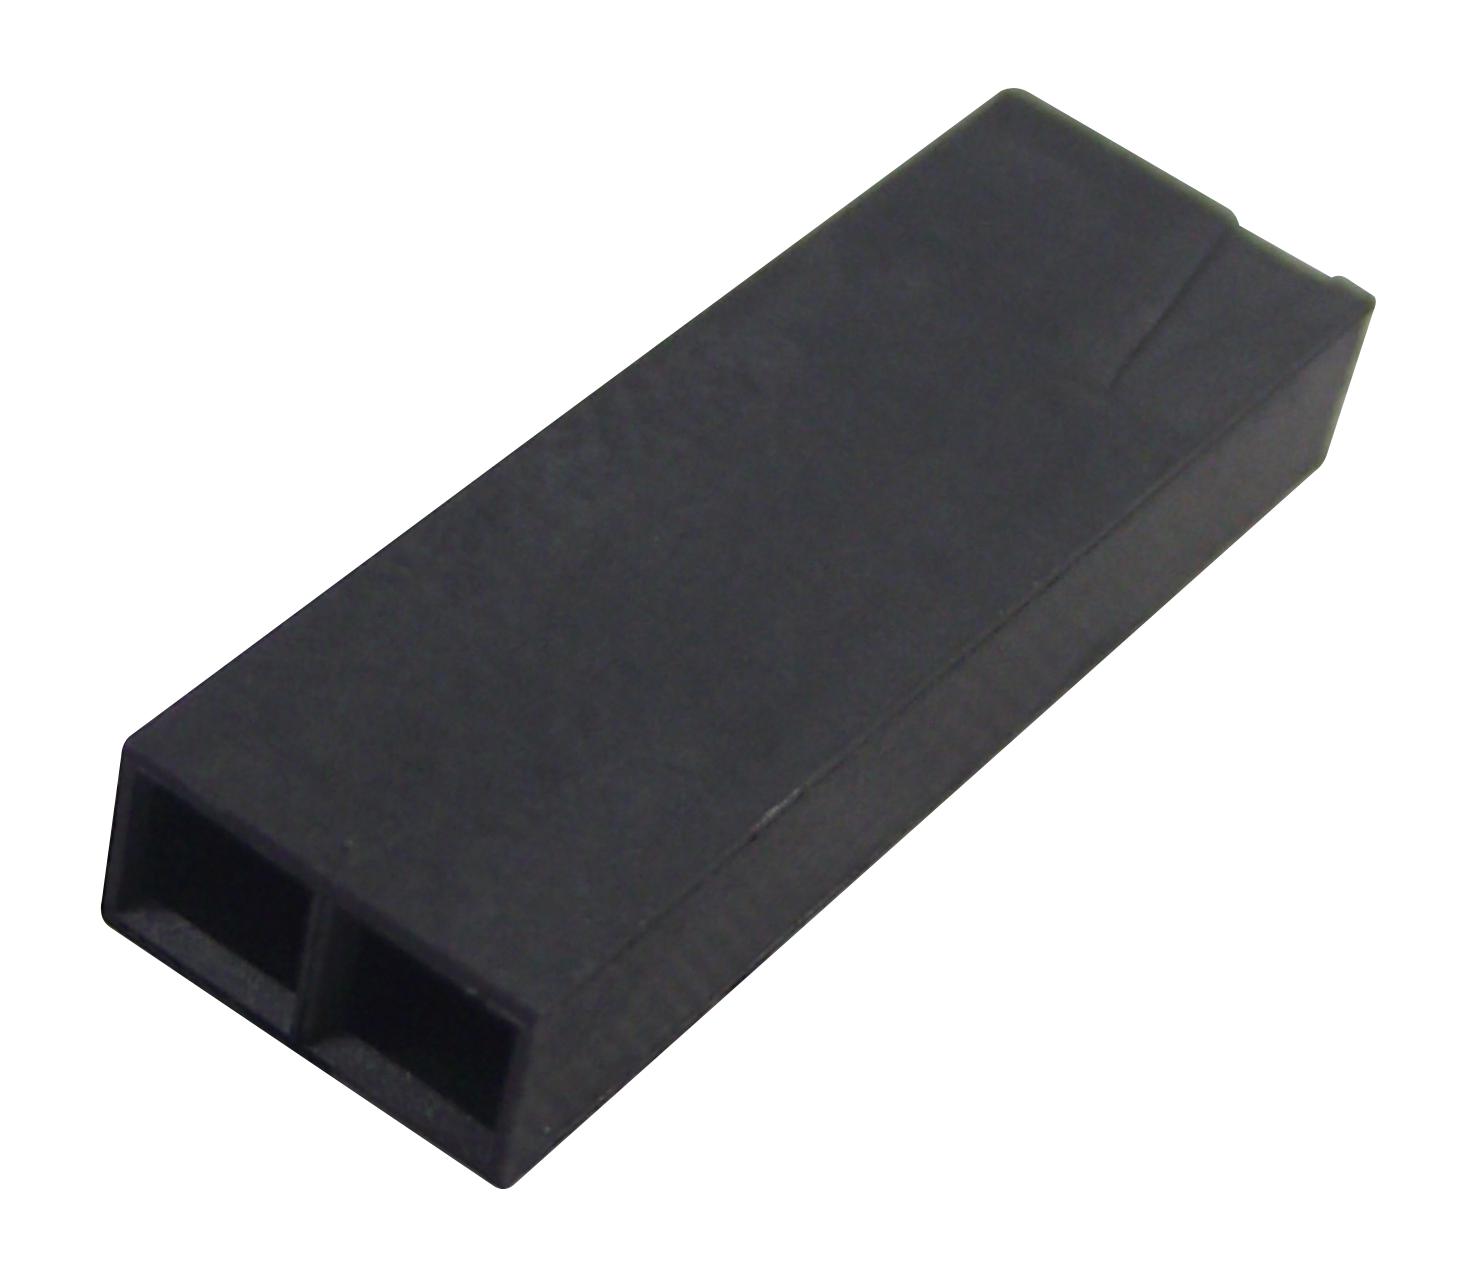 103648-8 CONNECTOR, HOUSING, RCPT, 9POS, 1ROW AMP - TE CONNECTIVITY